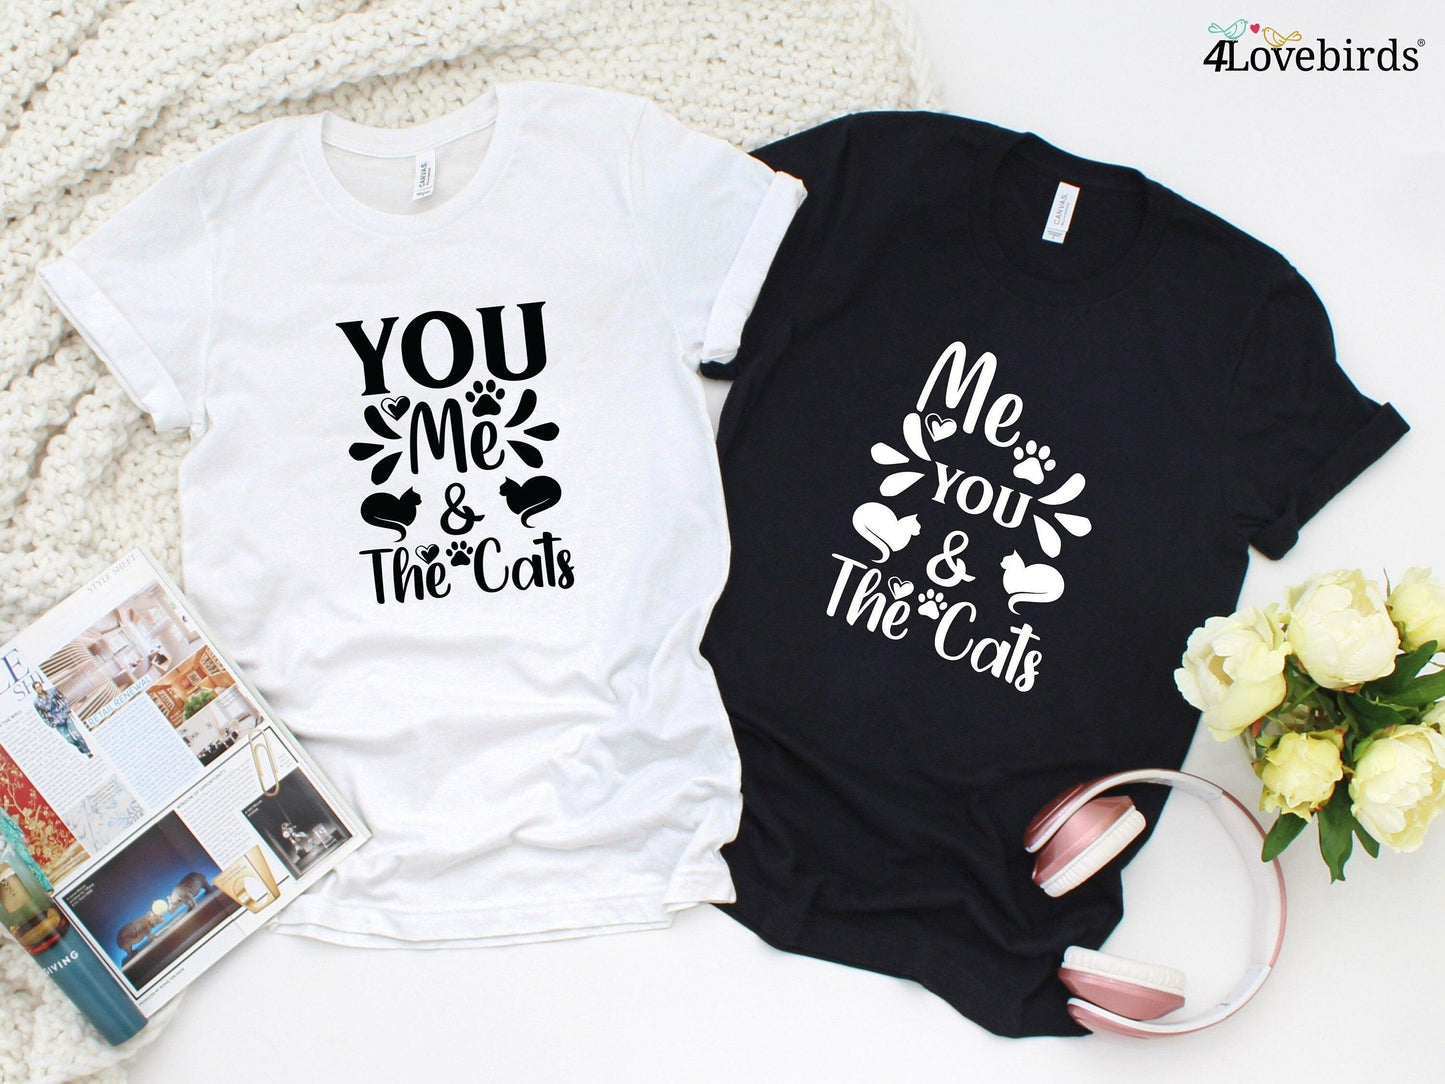 You, me & the Cats Hoodie, matching T-shirt, Gift for Couples, Valentine Sweatshirt, Pet Parents Longsleeve, Husband / Wife, Animal Lovers - 4Lovebirds